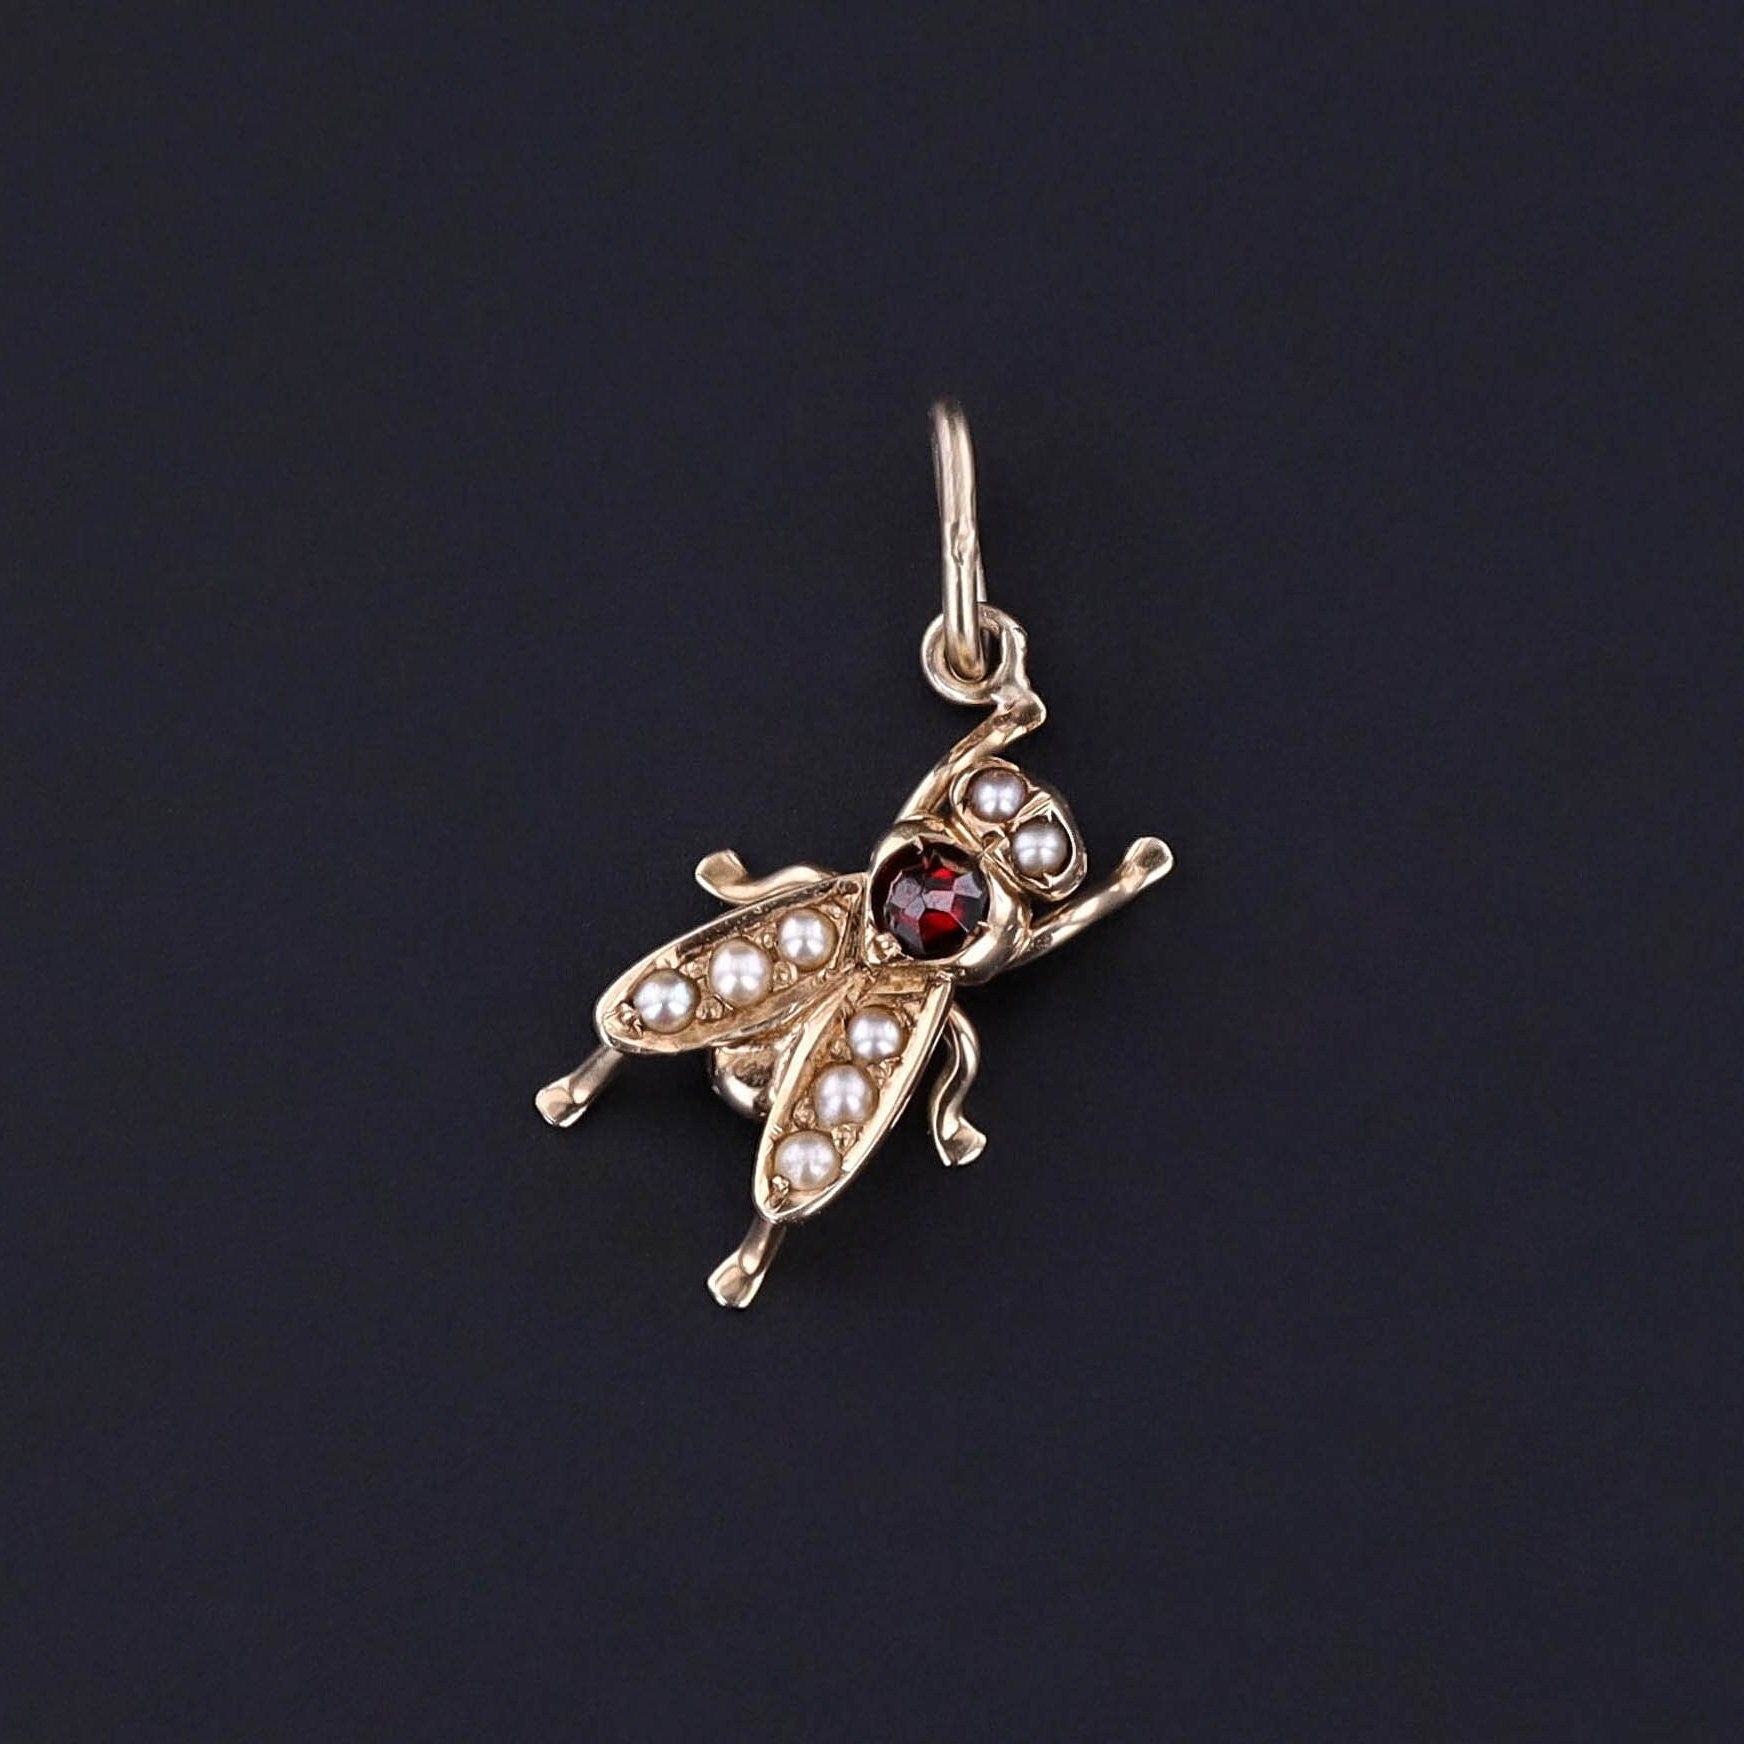 An antique fly charm created from a stickpin. The piece is 14k gold with pearls and a garnet and in great condition. Perfect for any charm bracelet, charm necklace, or chain.